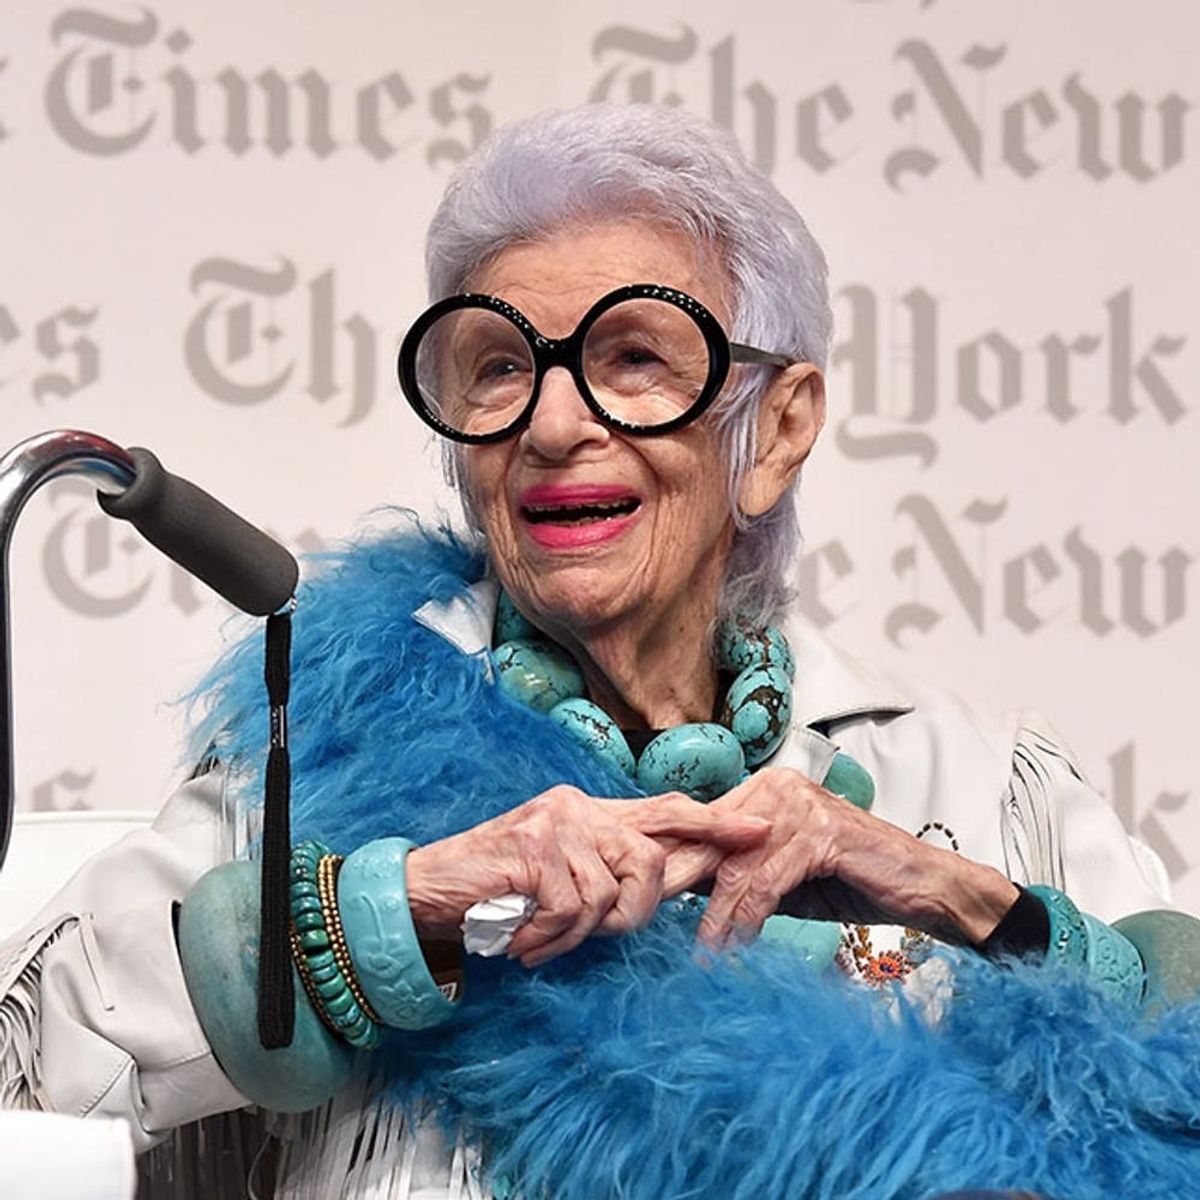 How to Age Gracefully According to This 93-Year-Old Style Icon